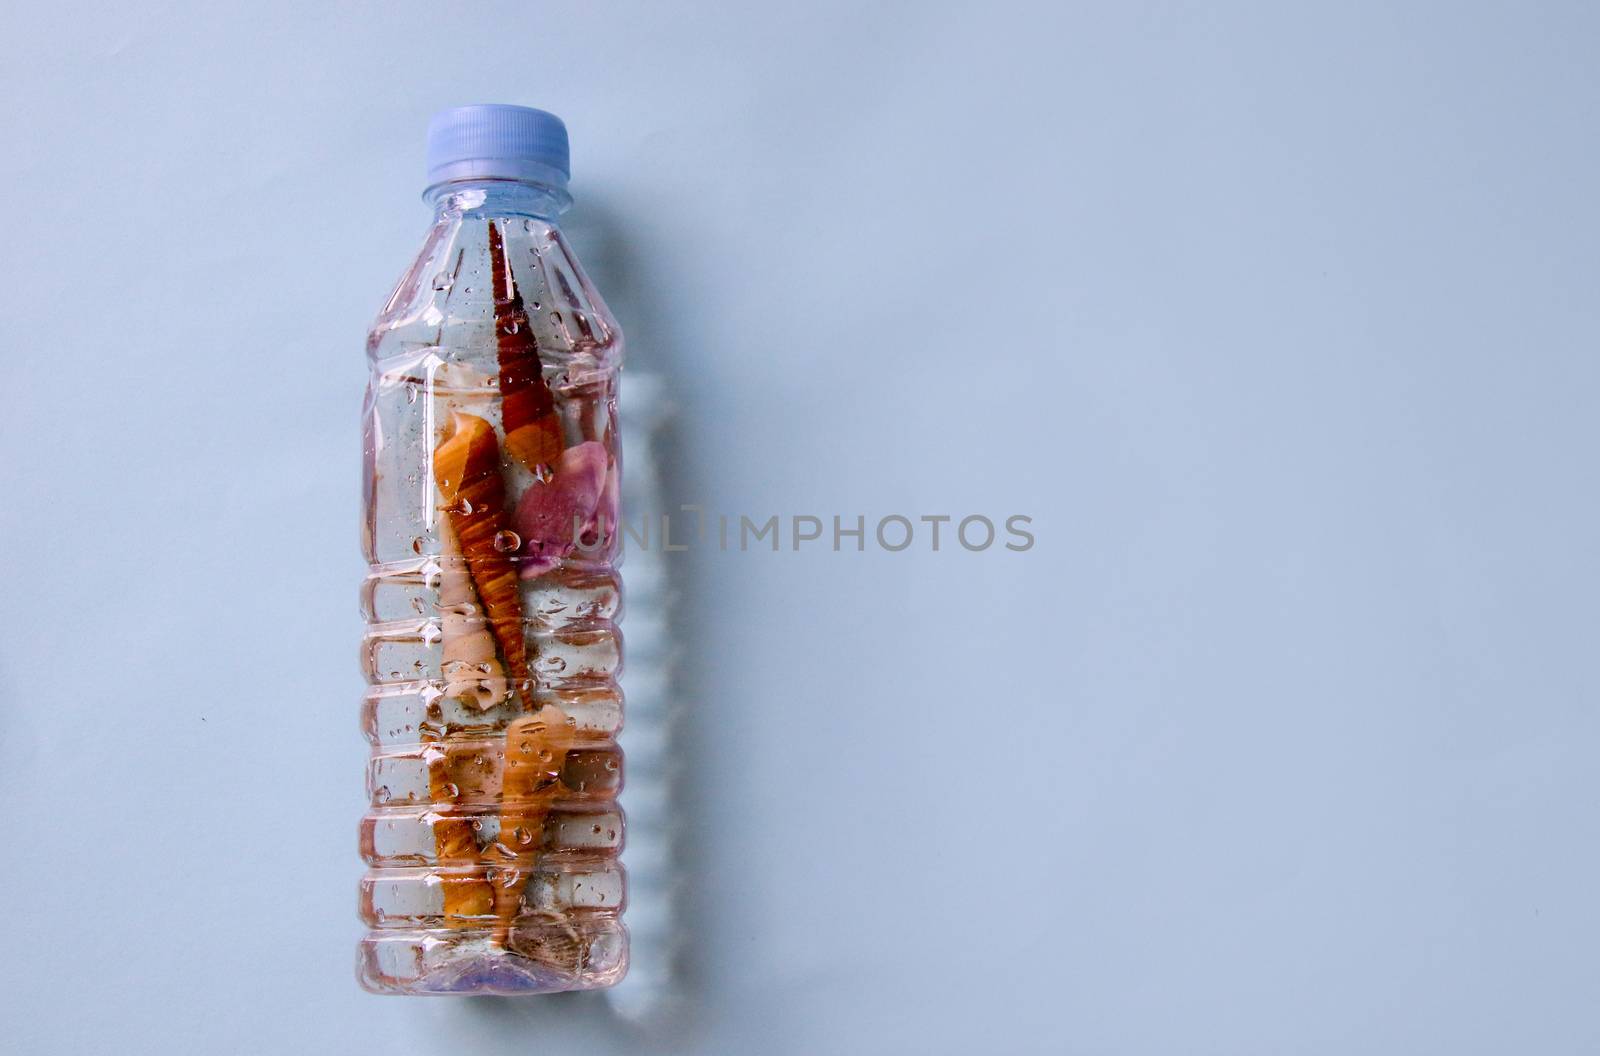 Conceptual still life showing ocean pollution, plastic pollution and what will be left of our world if we don't act now